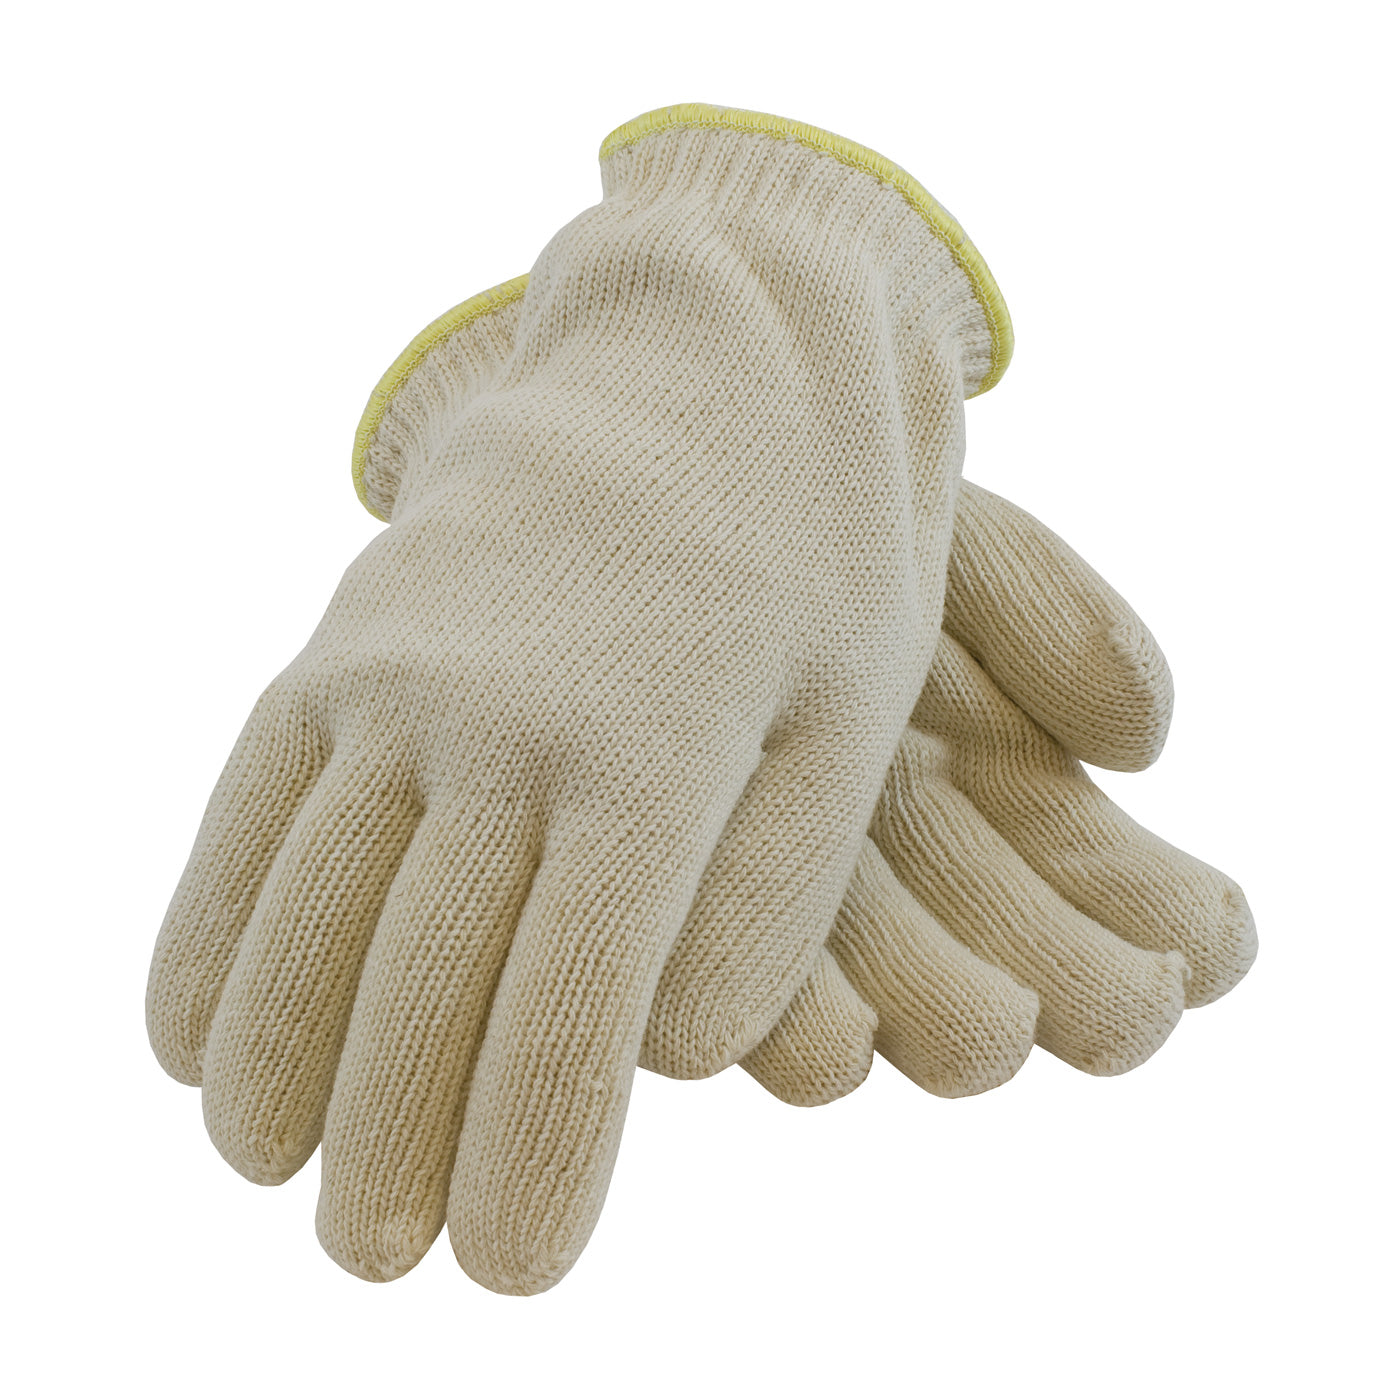 PIP 43-500L Double-Layered Cotton Seamless Knit Hot Mill Glove - 24 oz